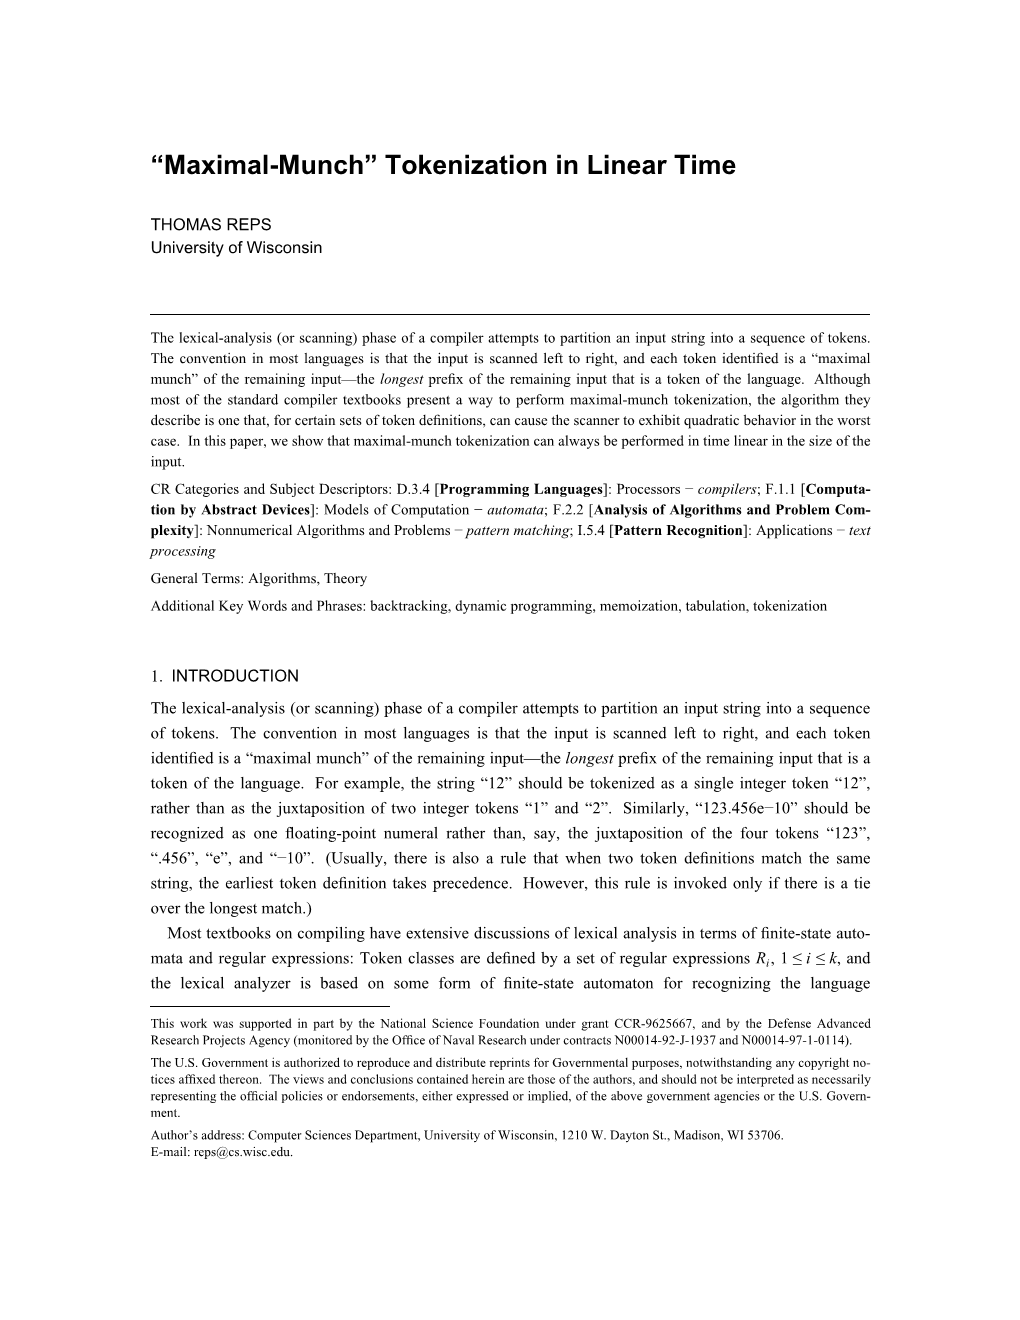 Maximal-Munchº Tokenization in Linear Time